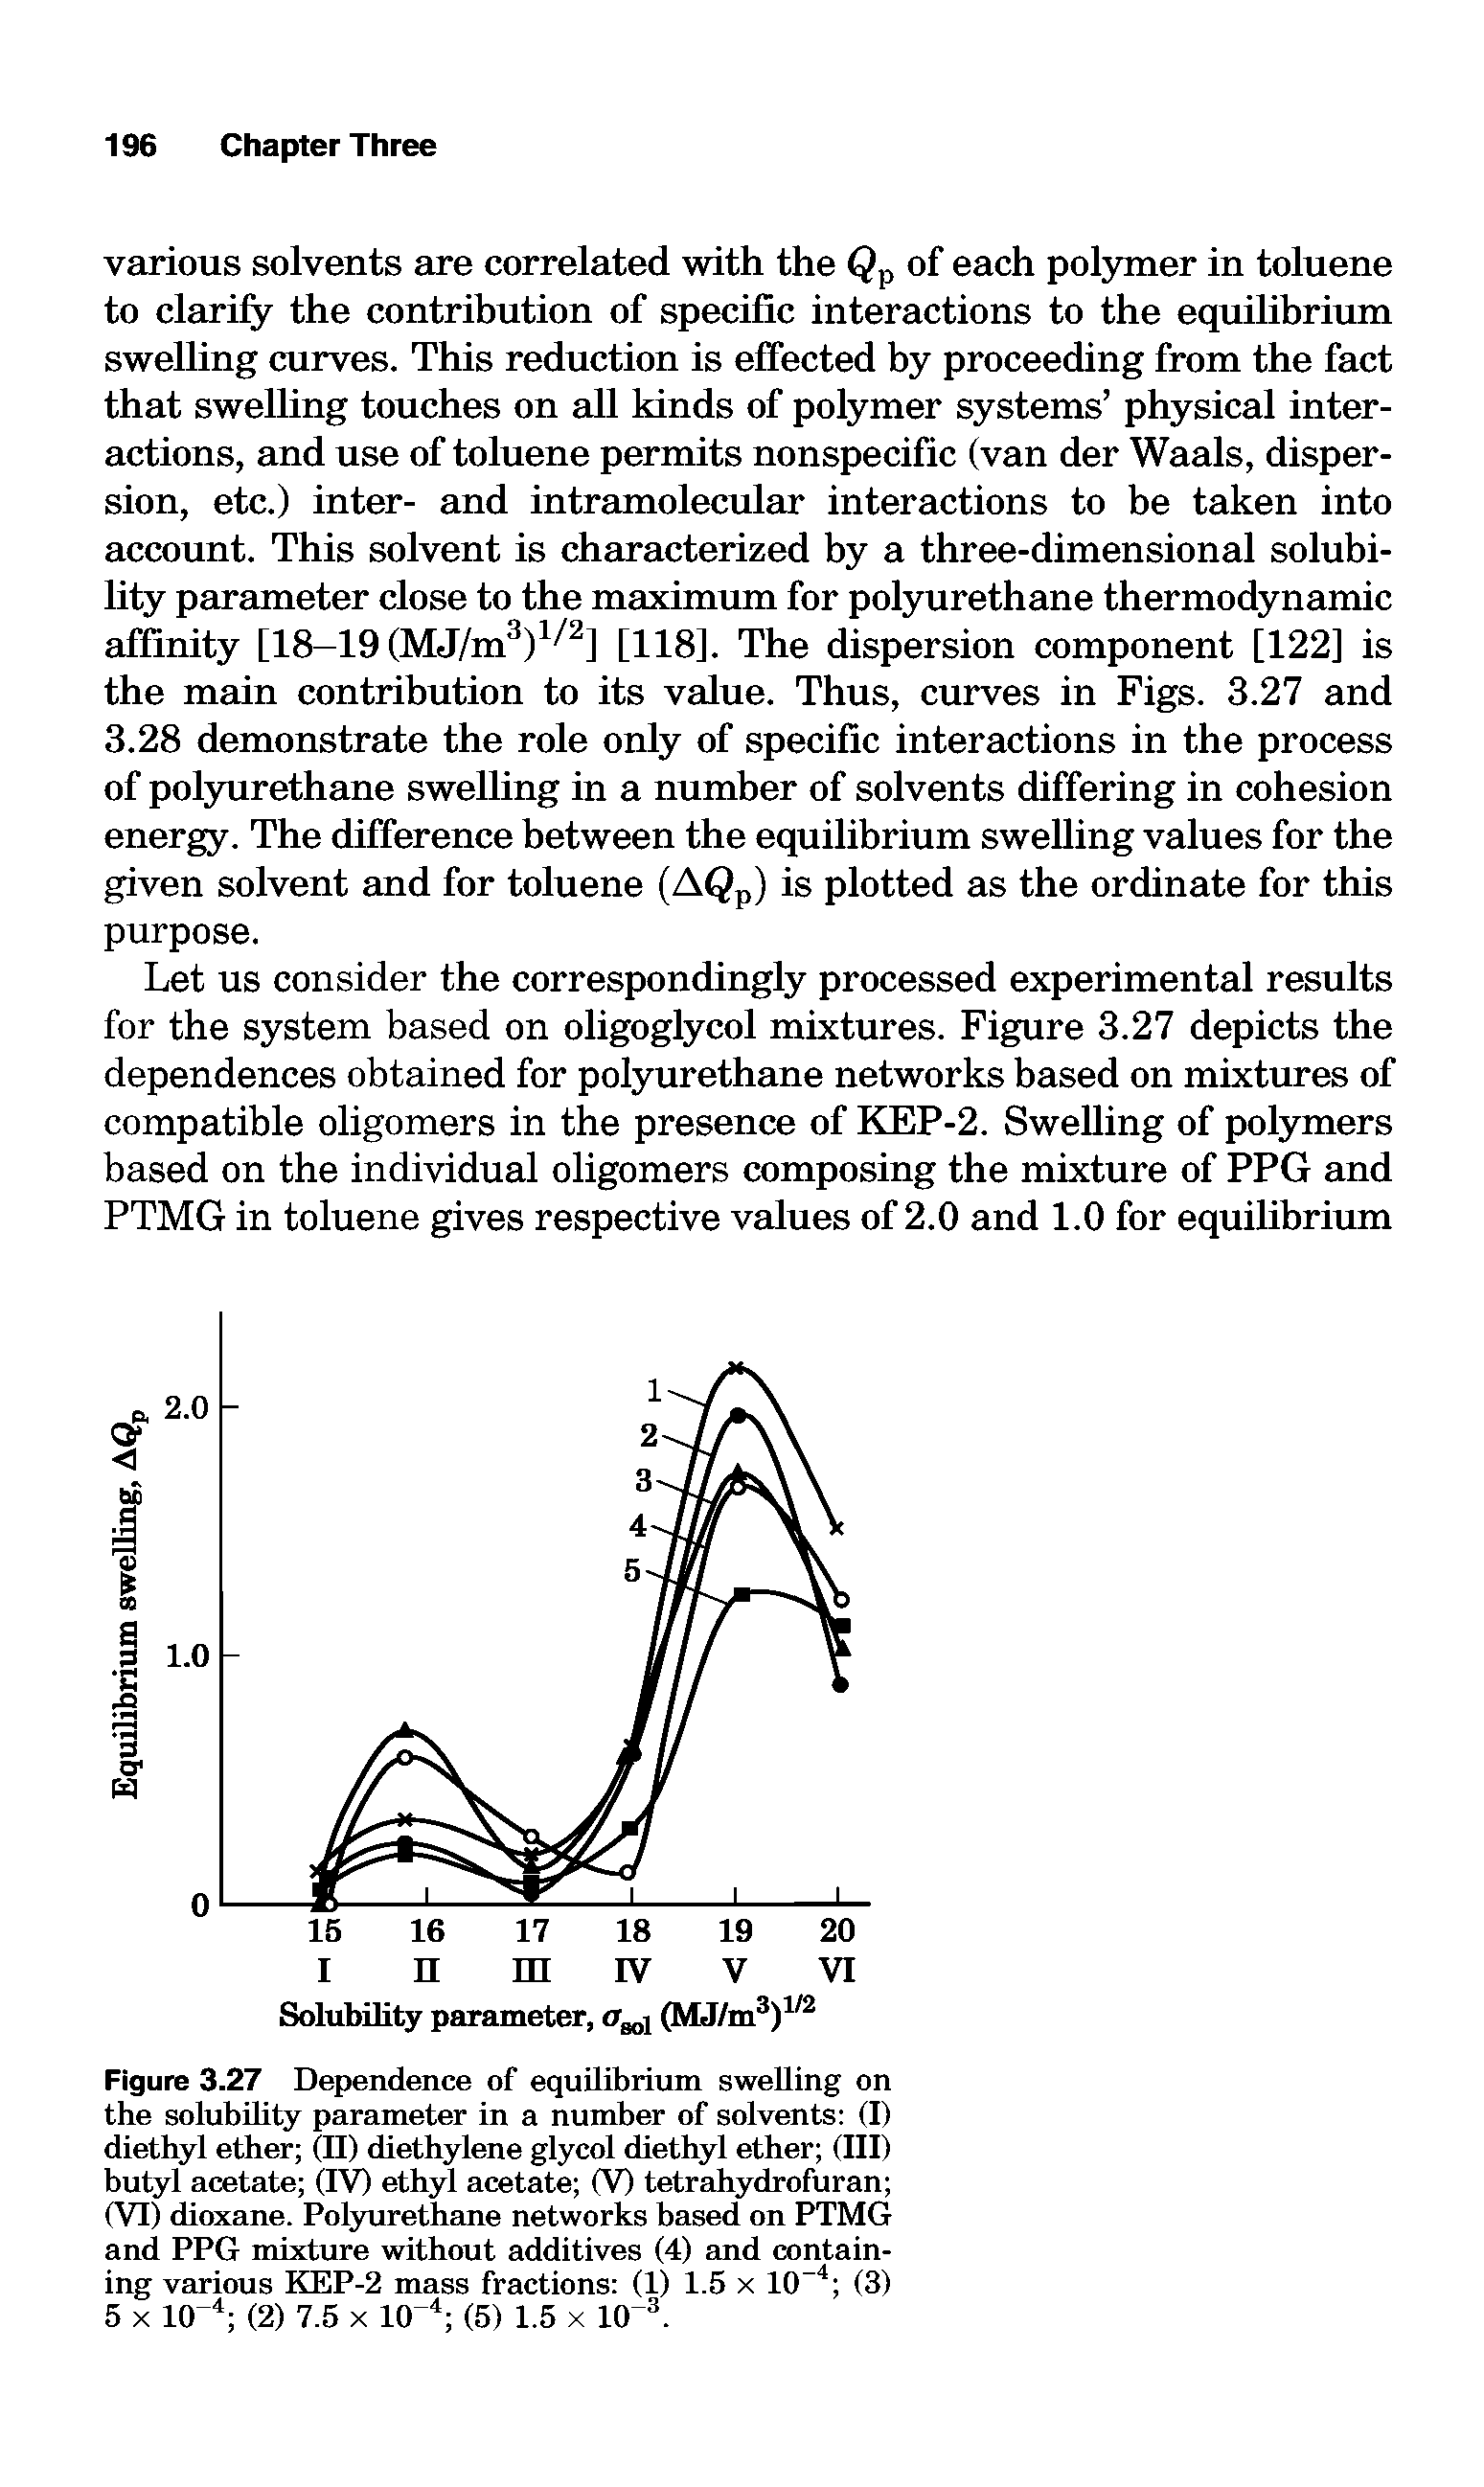 Figure 3.27 Dependence of equilibrium swelling on the solubility parameter in a number of solvents (I) diethyl ether (II) diethylene glycol diethyl ether (III) butyl acetate (IVO ethyl acetate (V) tetrahydrofuran (VI) dioxane. Pohoirethane networks based on PTMG and PPG mixture without additives (4) and containing various KEP-2 mass fractions (1) 1.5 x 10 " (3) 5 X 10 (2) 7.5 x 10 (5) 1.5 x 10...